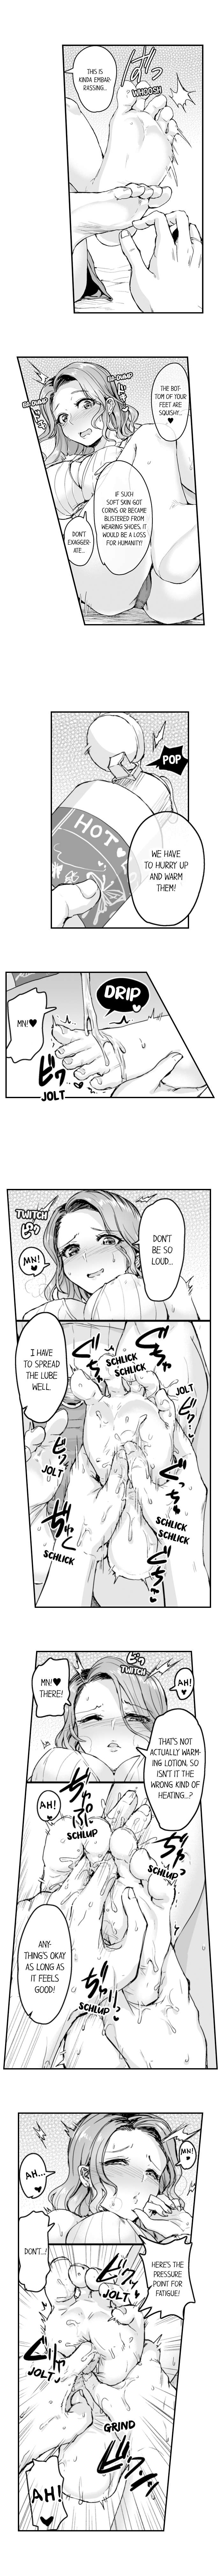 The Massage ♂♀ The Pleasure of Full Course Sex Chapter 2 - Page 4